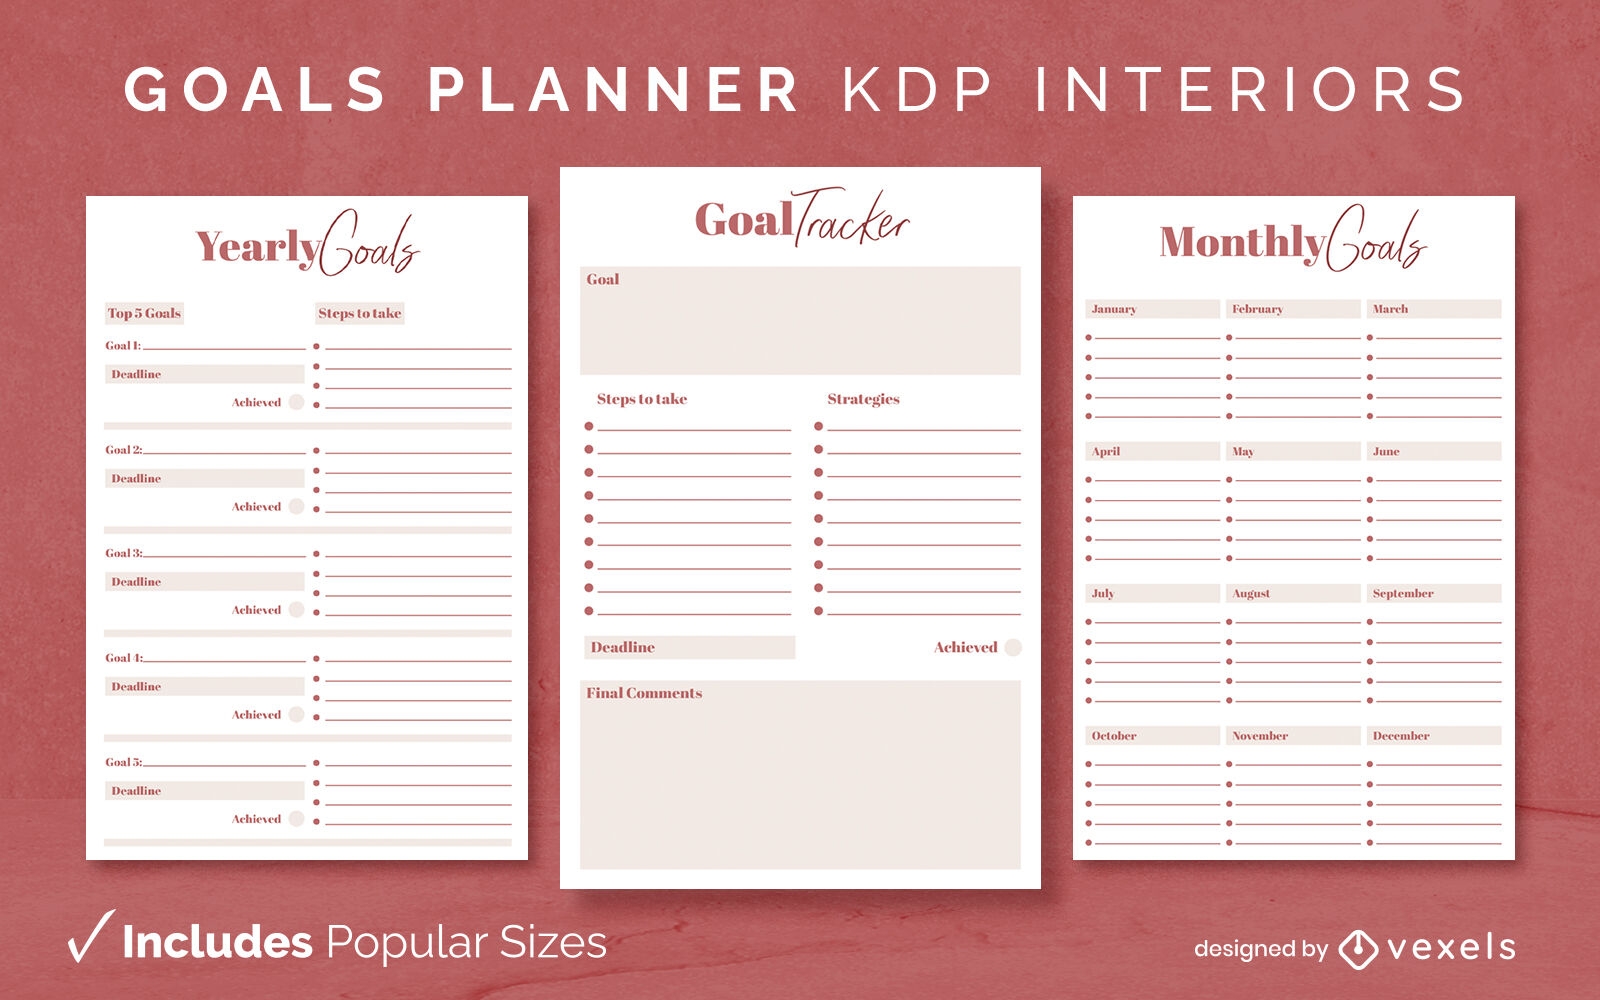 Goal planner template yearly/monthly KDP interior